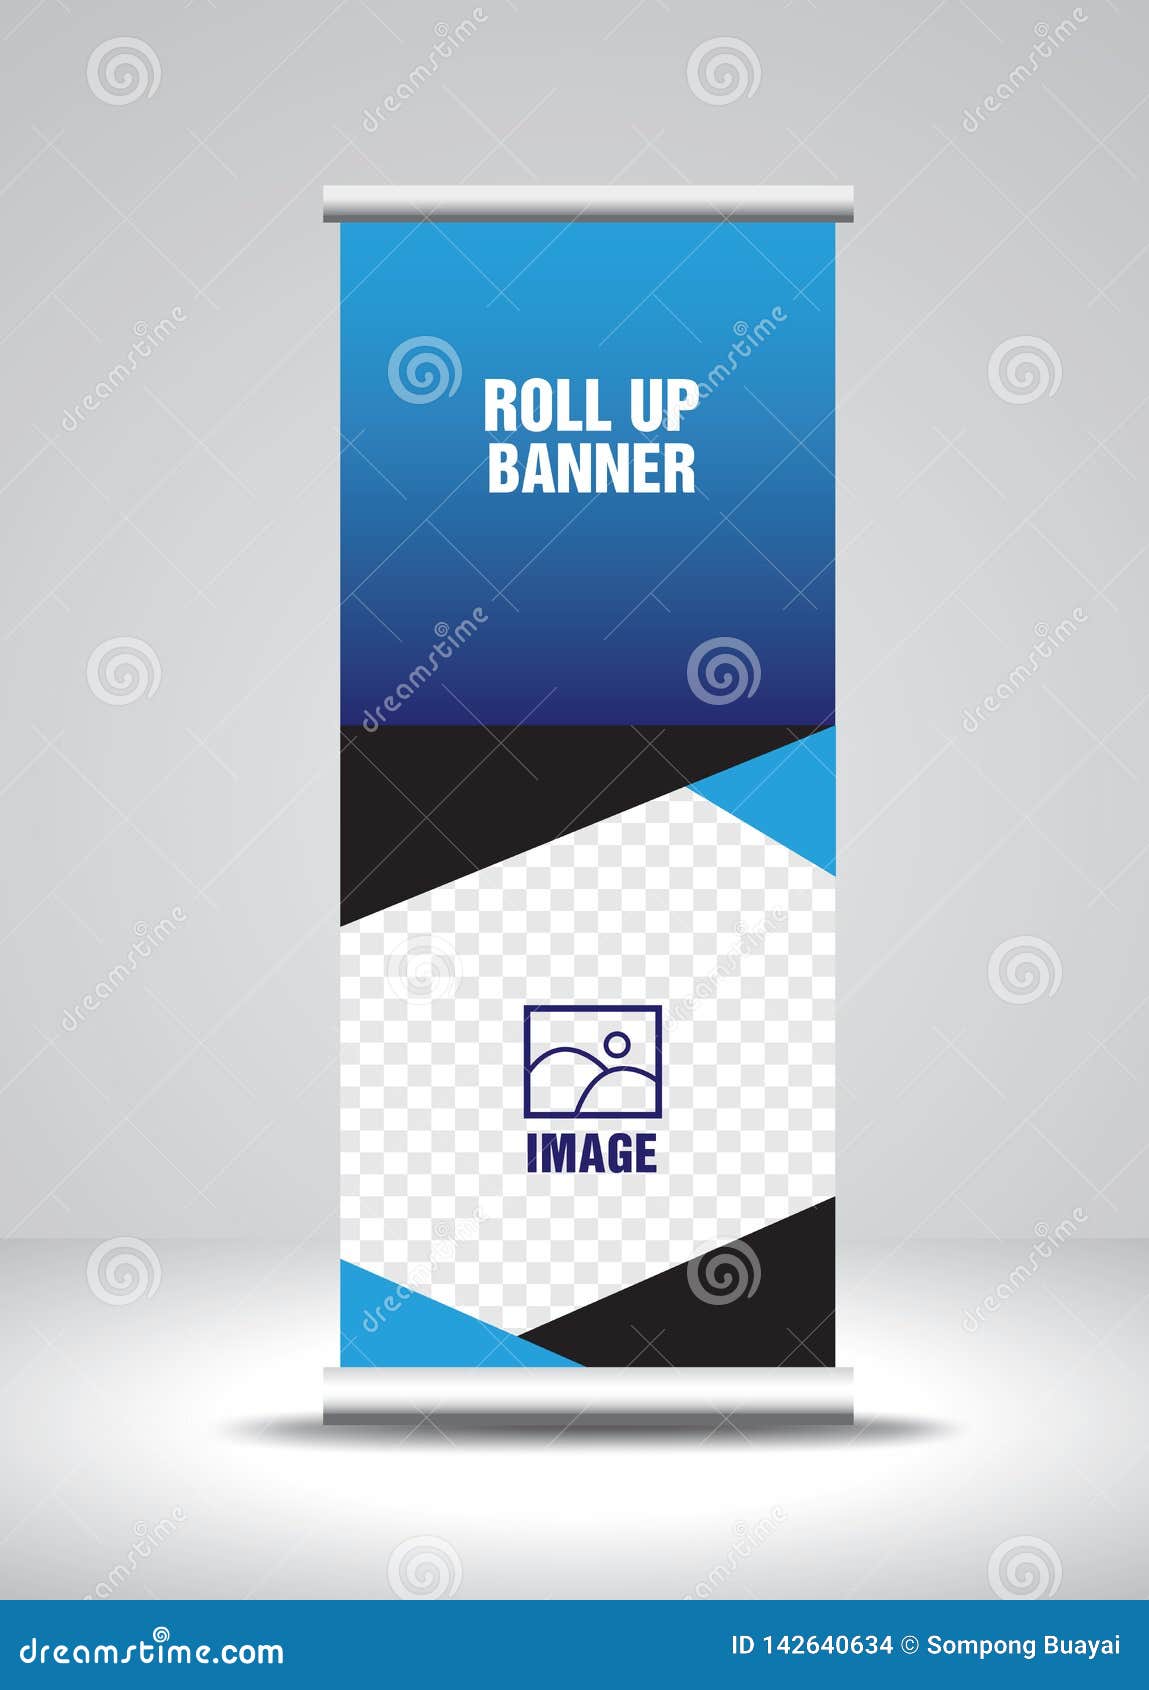 Download Roll Up Banner Template Vector Banner Stand Exhibition Design Advertisement Pull Up X Banner Stock Vector Illustration Of Flyer Design 142640634 PSD Mockup Templates